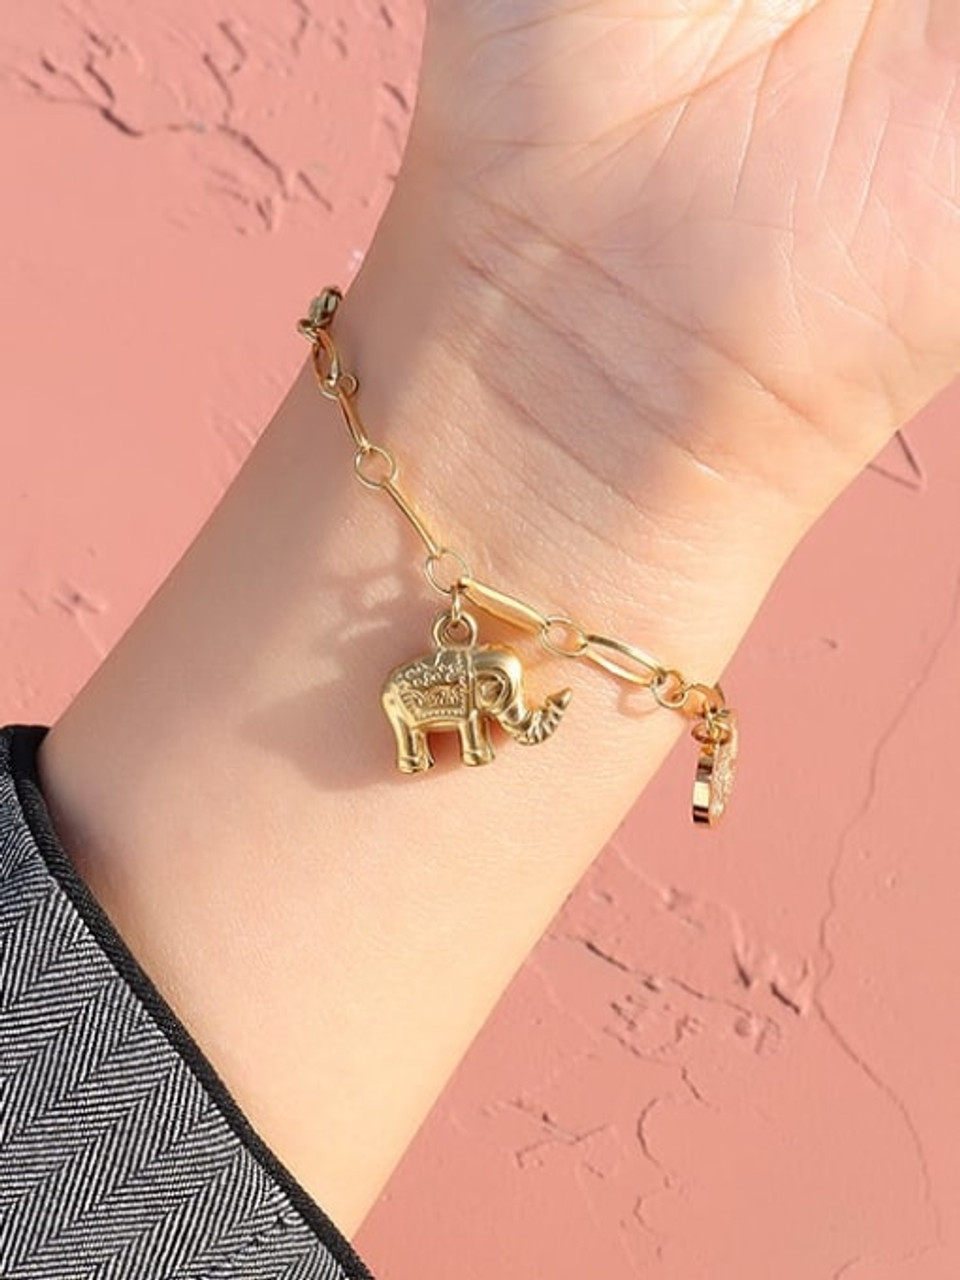 Bracelet of 18 kt Yellow Gold with Elephant Charms - Cape Diamond Exchange  | Shop Jewelry Online - Jewelry Shop in Cape Town